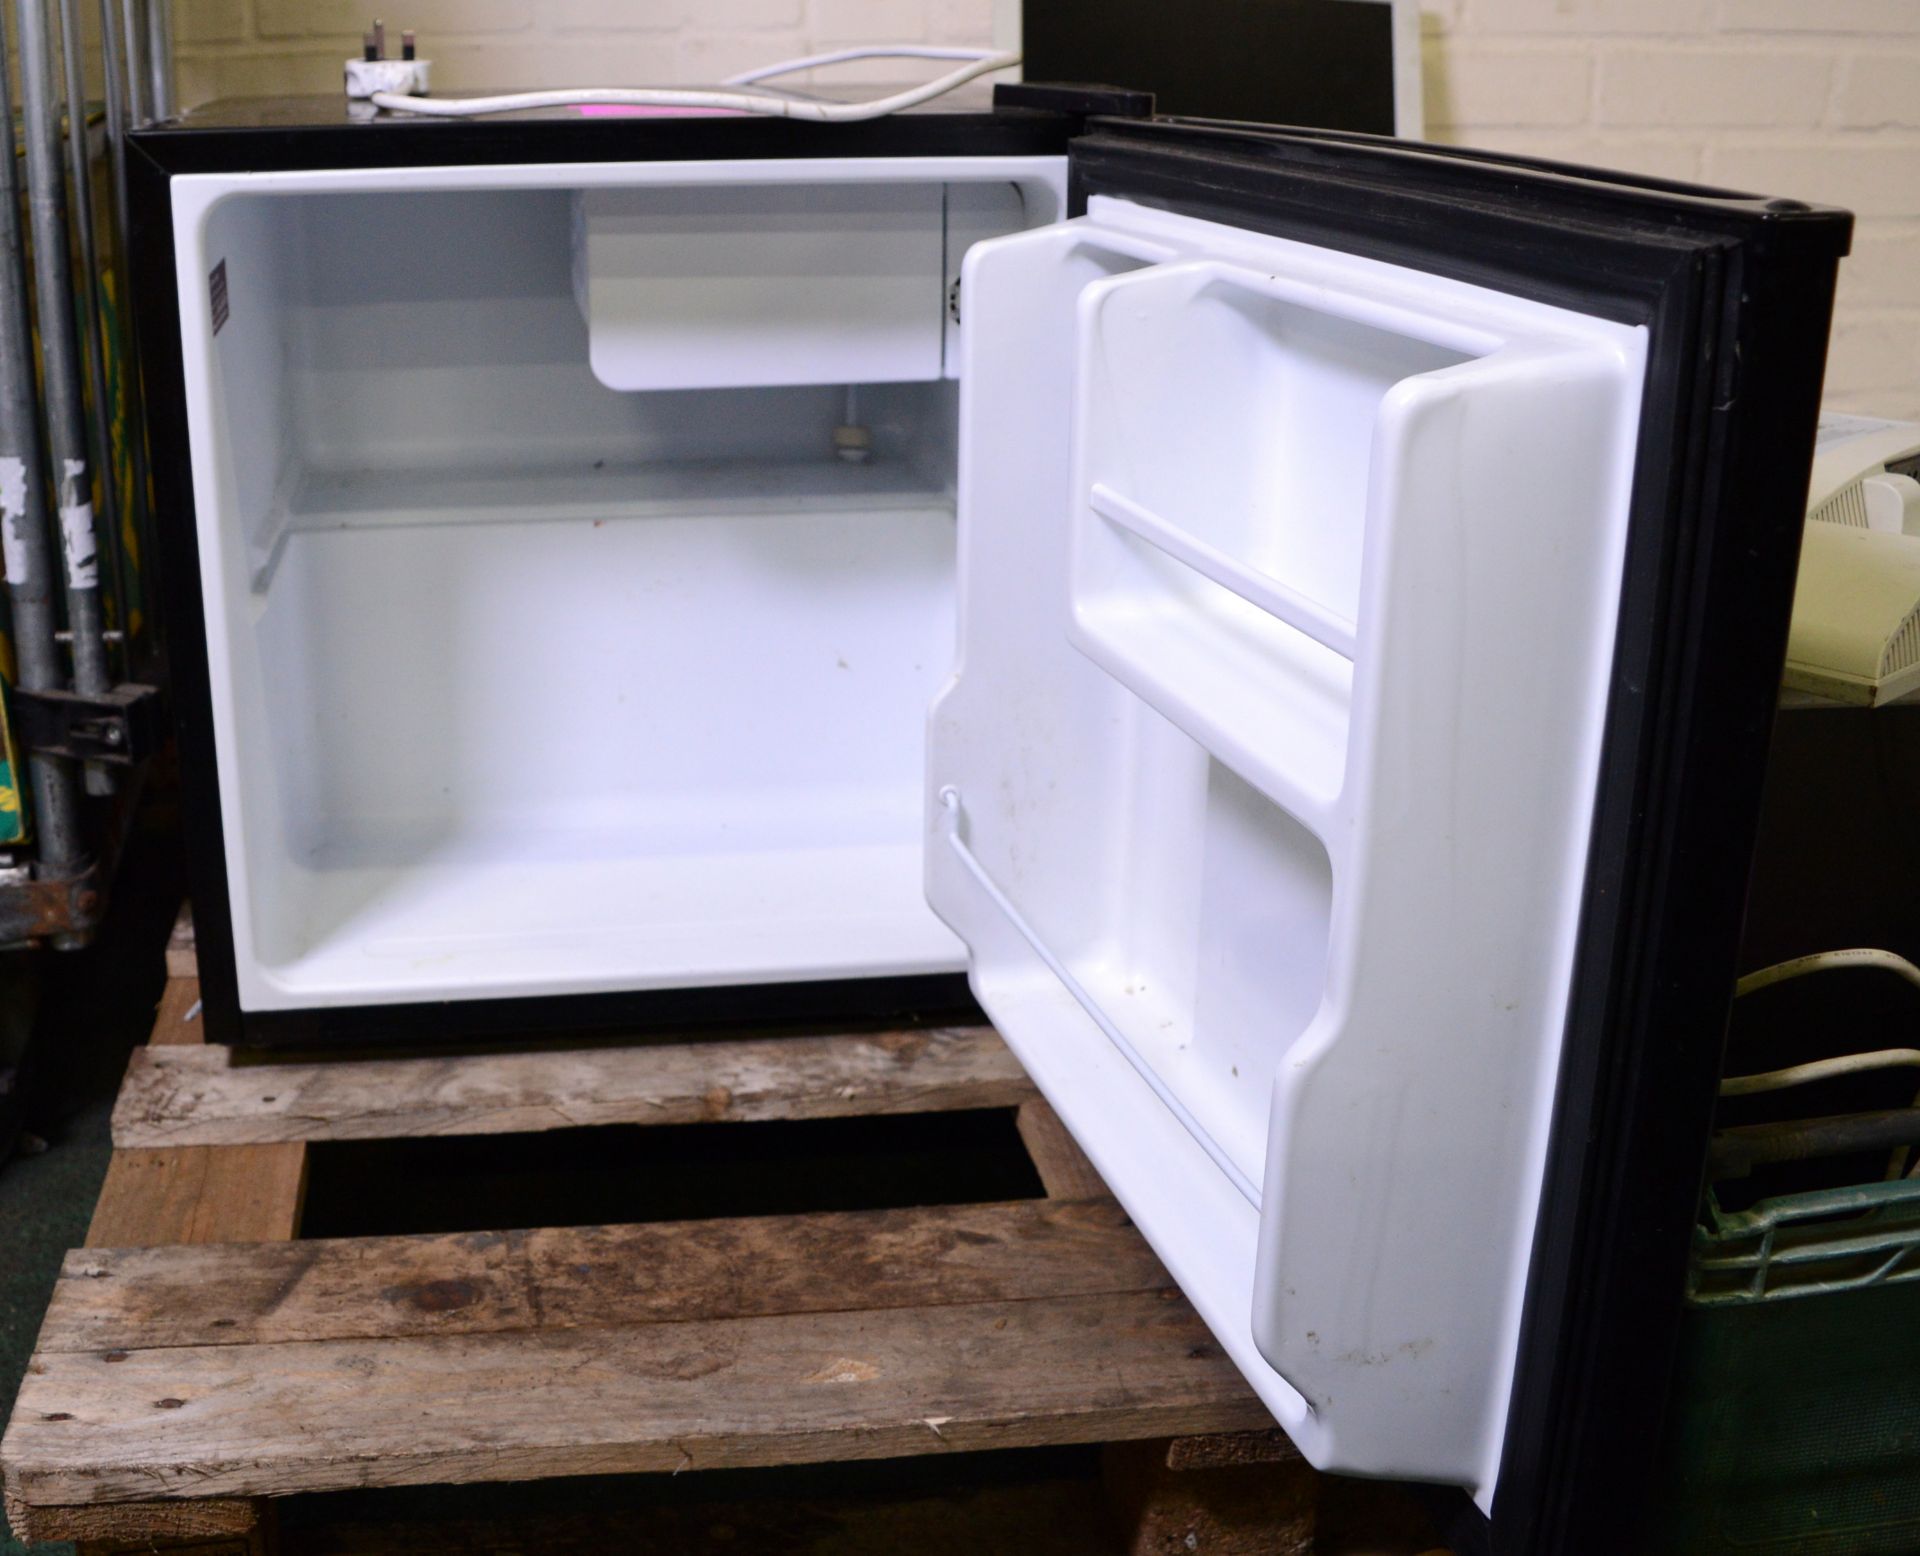 Russel Hobbs Fridge with Freezer Compartment - Working - W 470 x D 440 x H 480mm. - Image 2 of 2